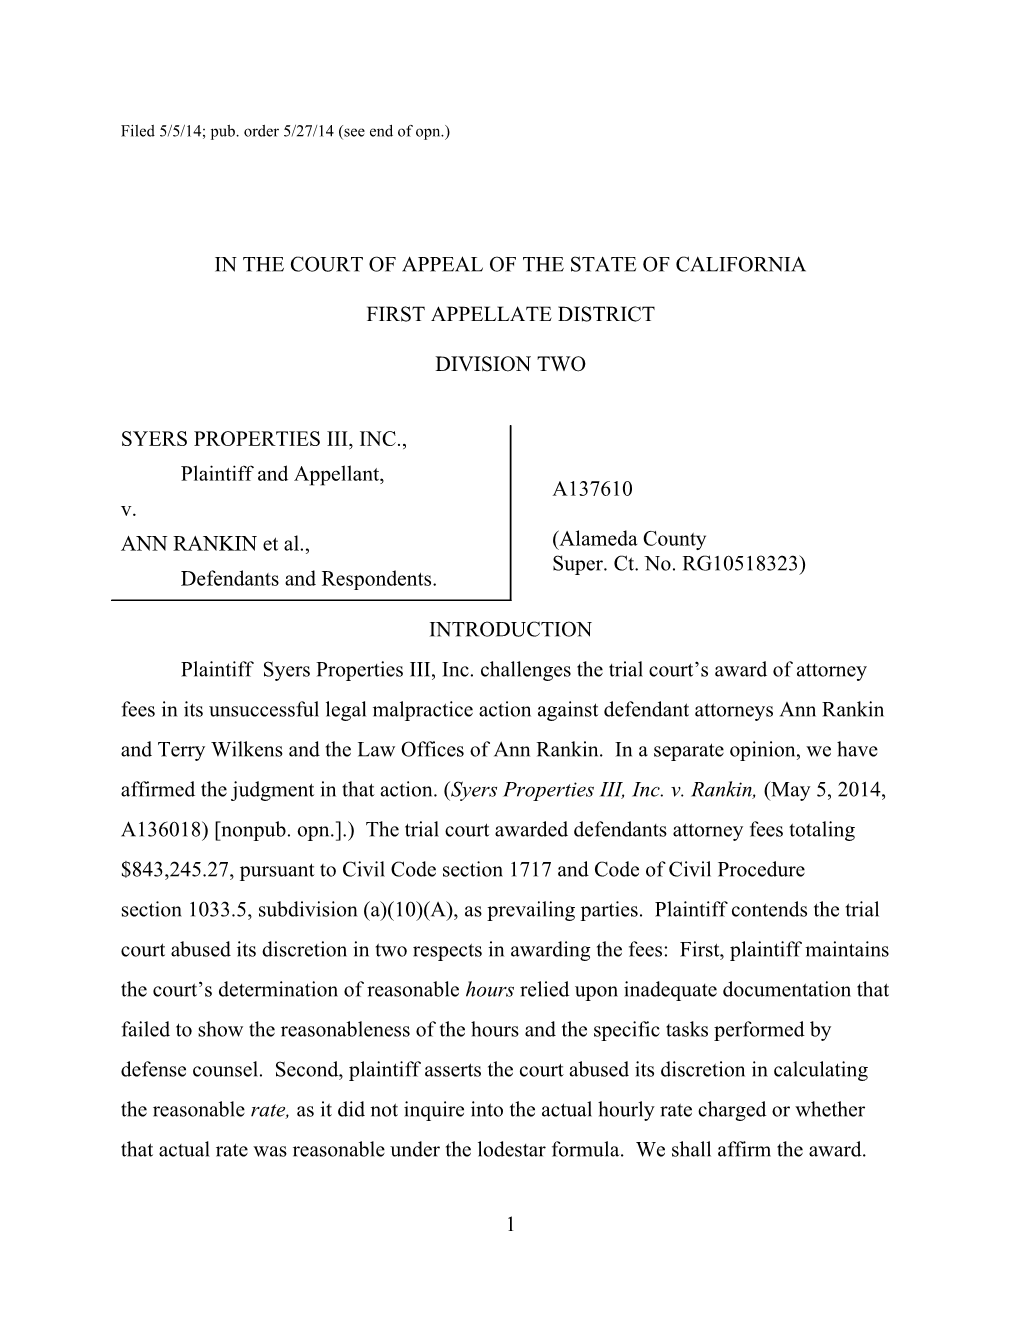 Filed 5/5/14; Pub. Order 5/27/14 (See End of Opn.)